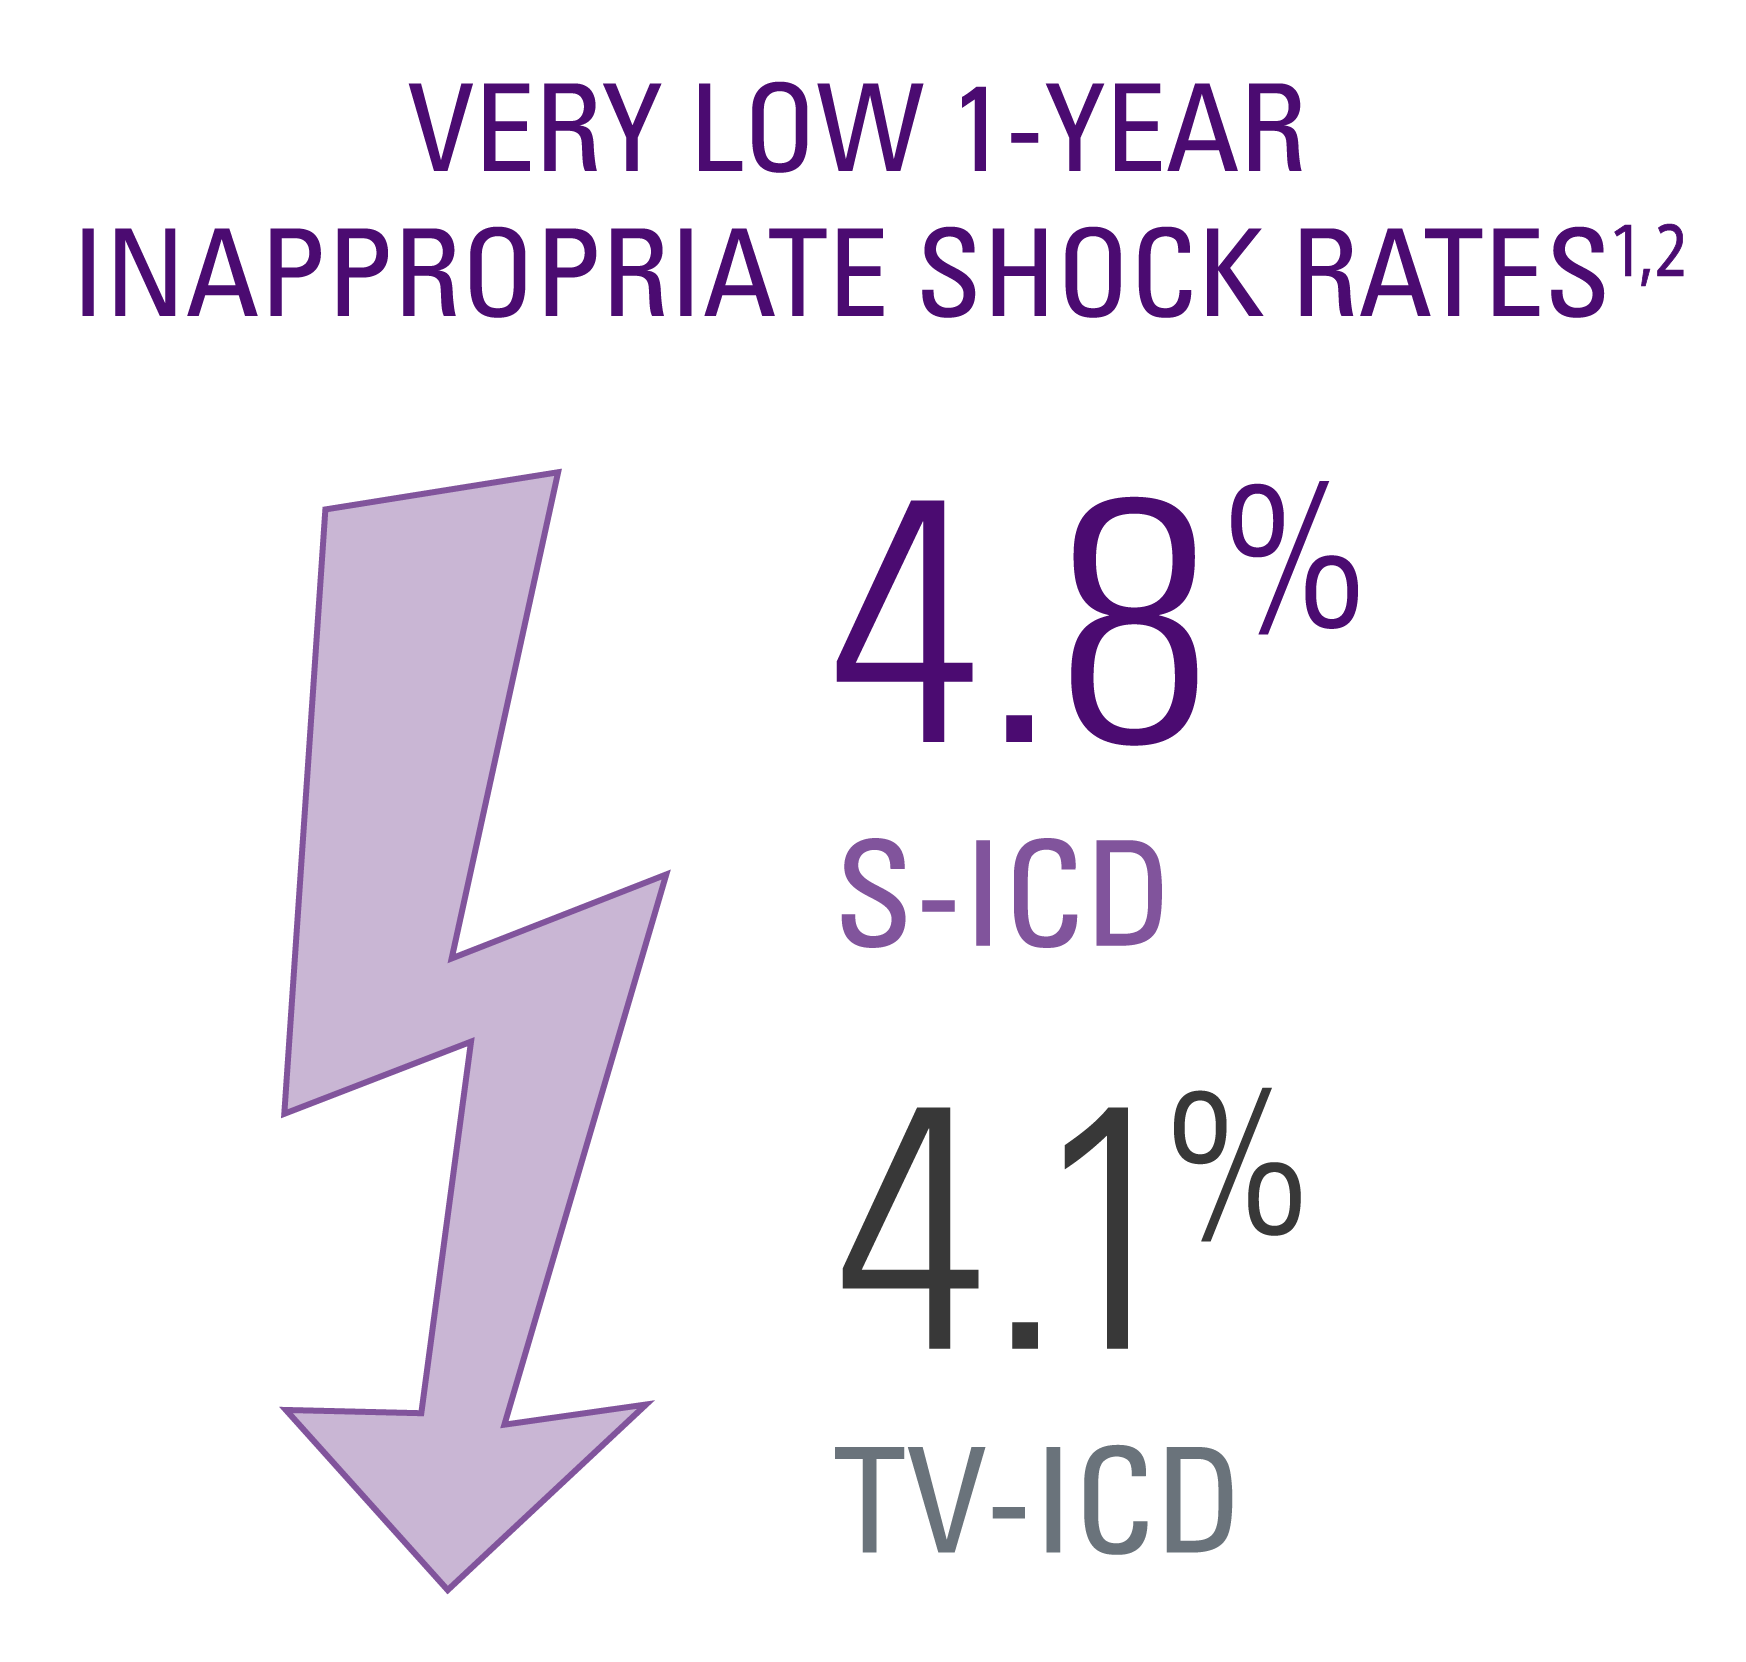 Very low 1-year inappropriate shock rates: 4.8% for S-ICD and 4.1% for TV-ICD.
